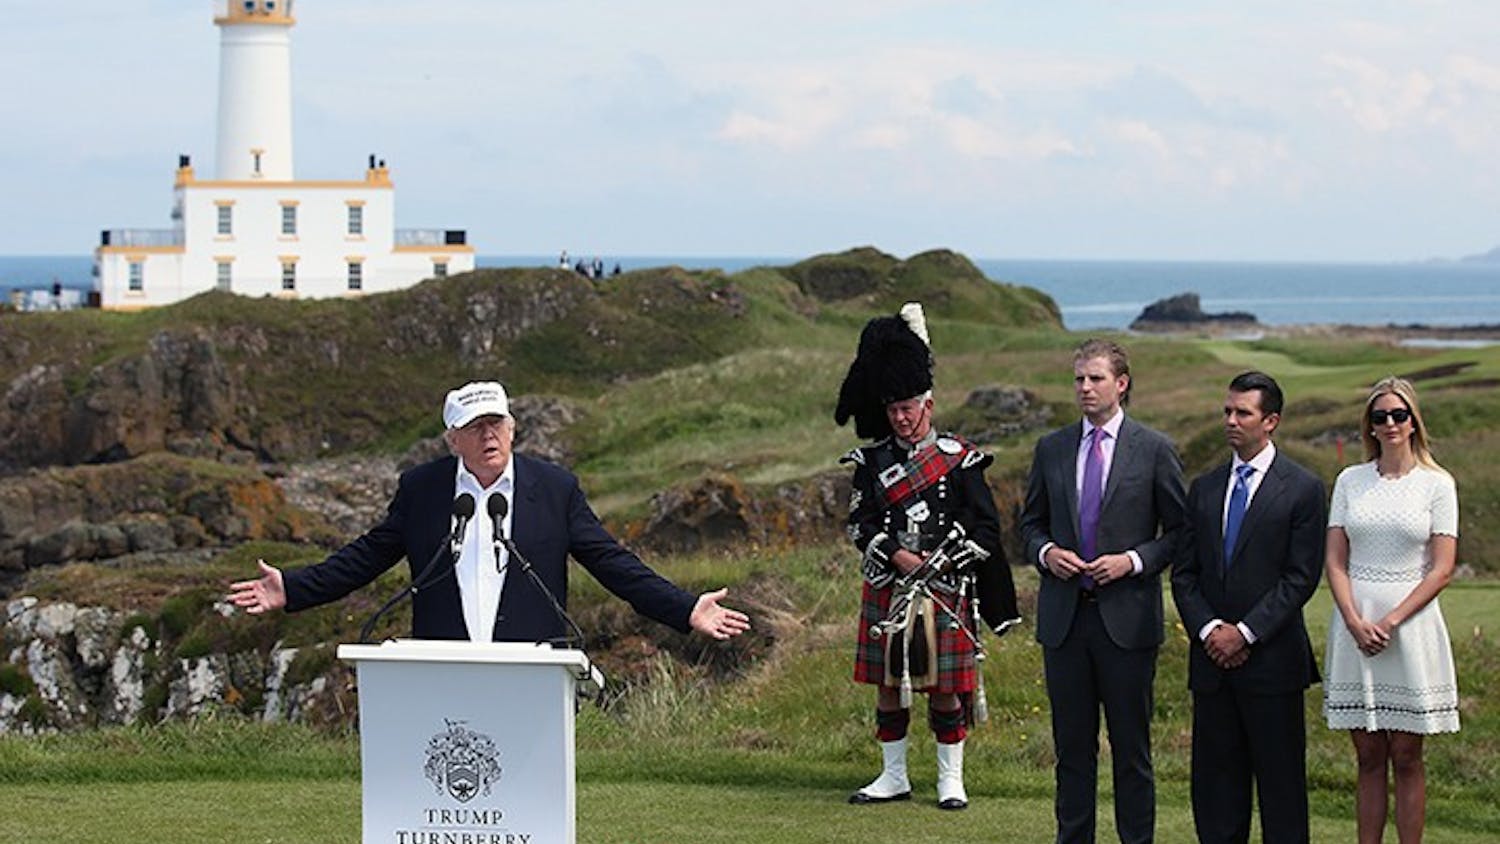 From right, Ivanka, Donald Jr.and Erik Trump listen as their father, US presidential hopeful Donald Trump, speaks at Turnberry hotel in South Ayrshire, where the Trump Turnberry golf course has been revamped, on June 24, 2016. (Andrew Milligan/PA Wire/Abaca Press/TNS) 